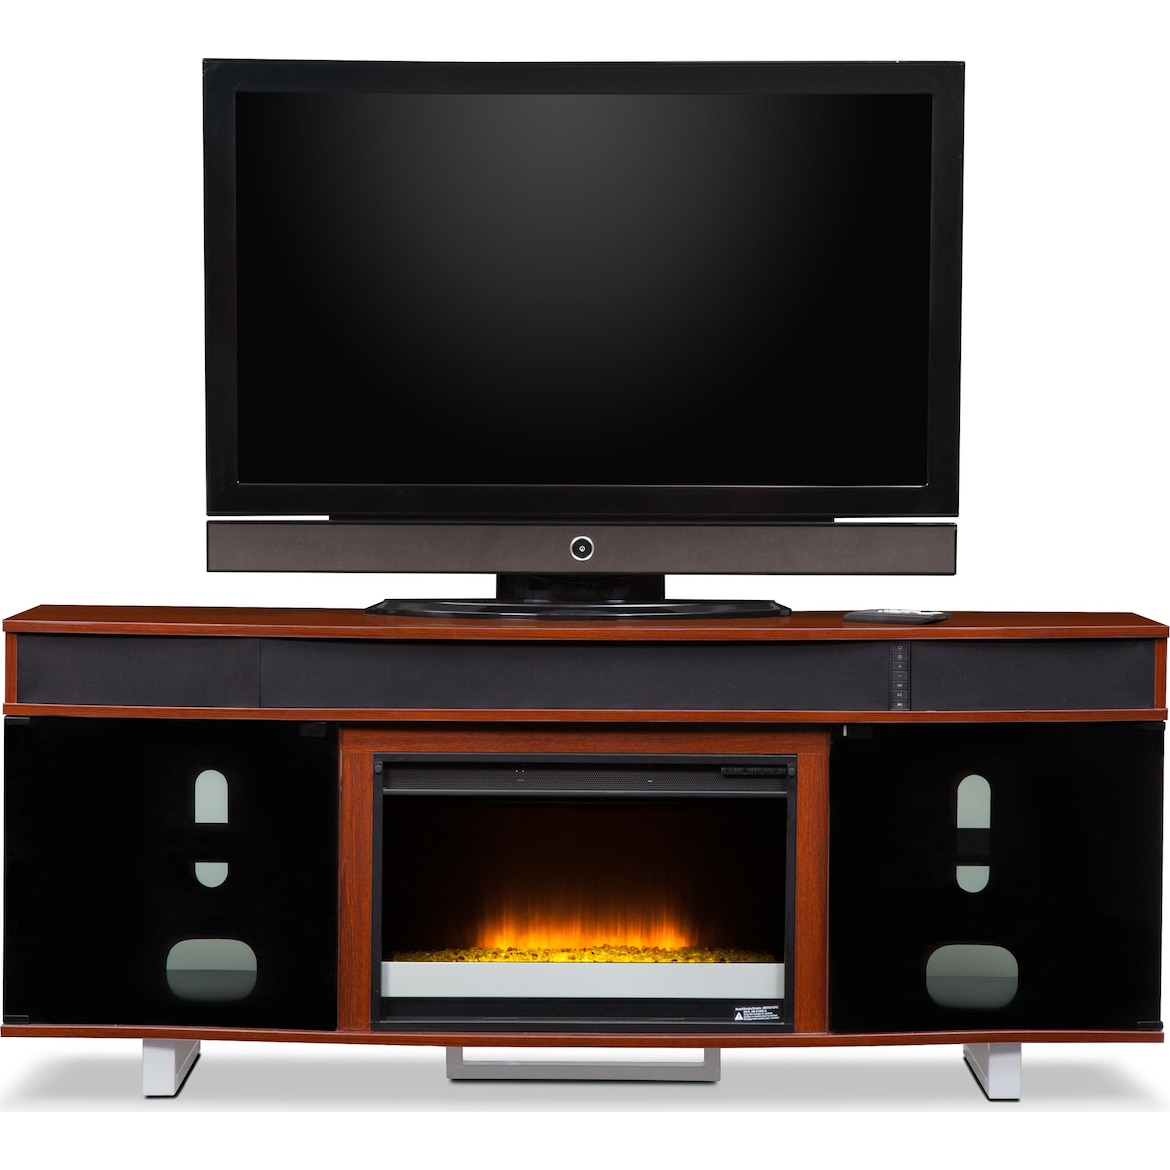 Pacer Fireplace TV Stand with Sound Bar | American ...